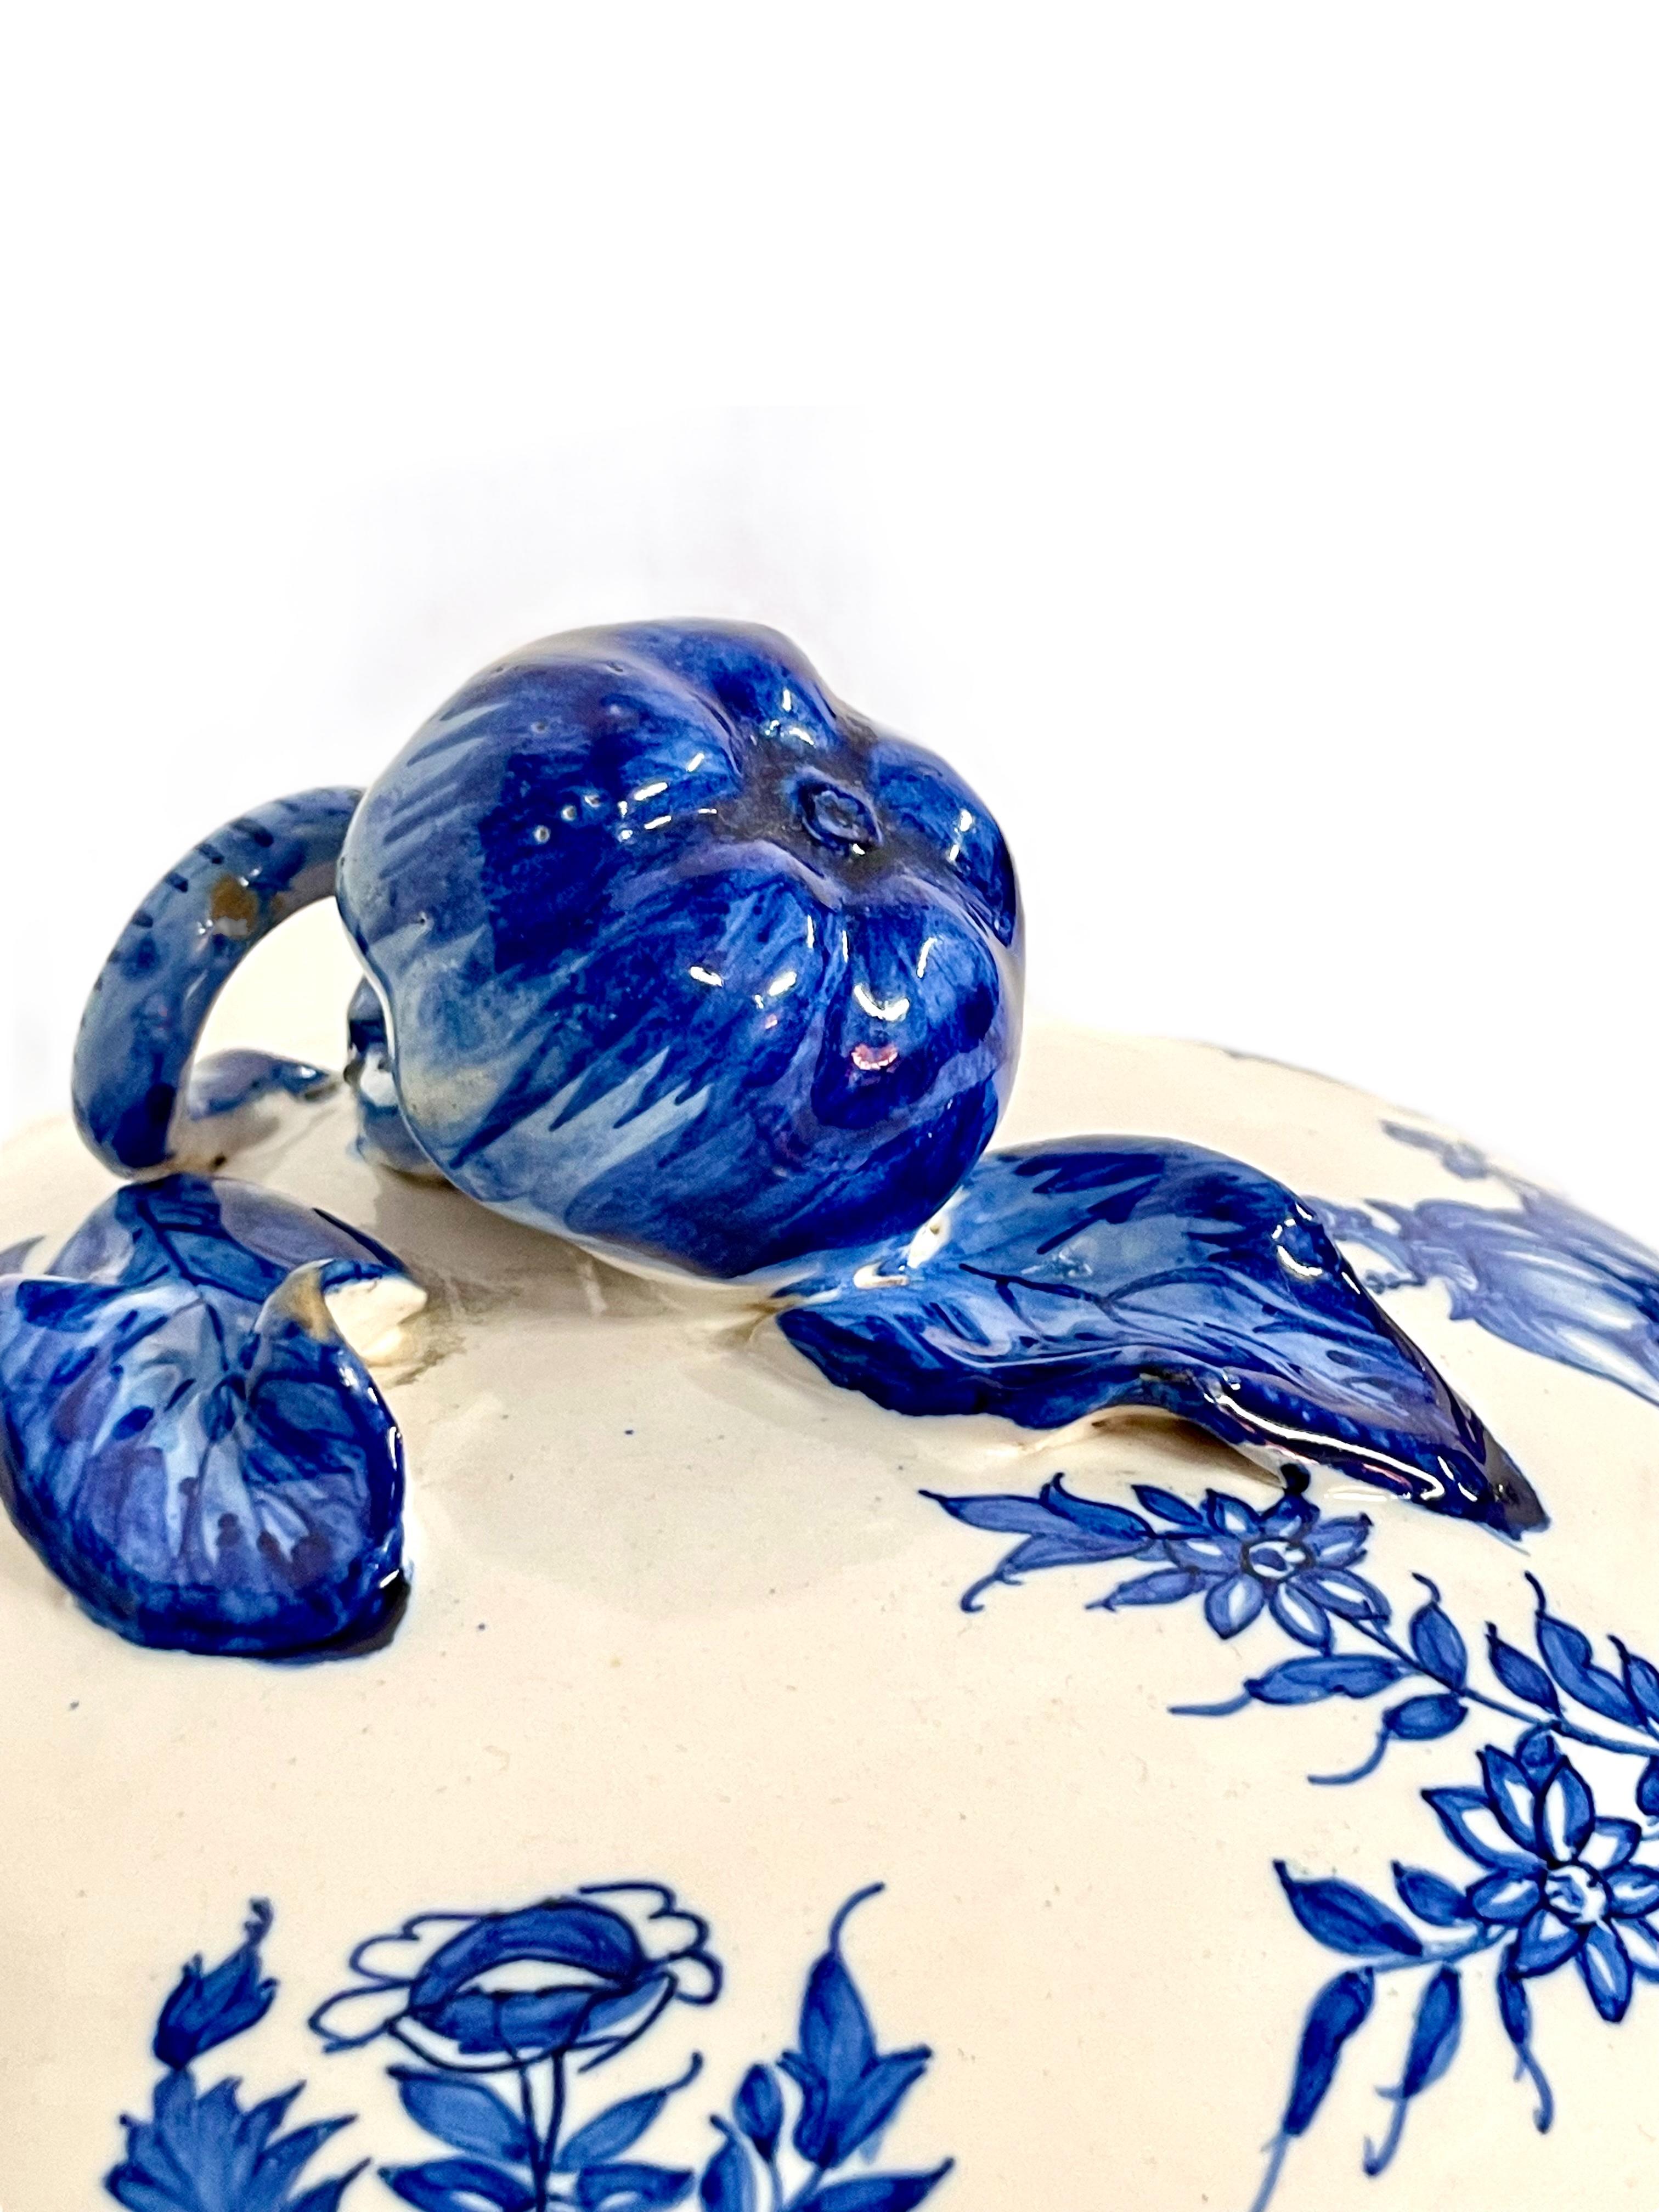 Blue and White Earthenware Lidded Tureen with Fantastical Decoration For Sale 4